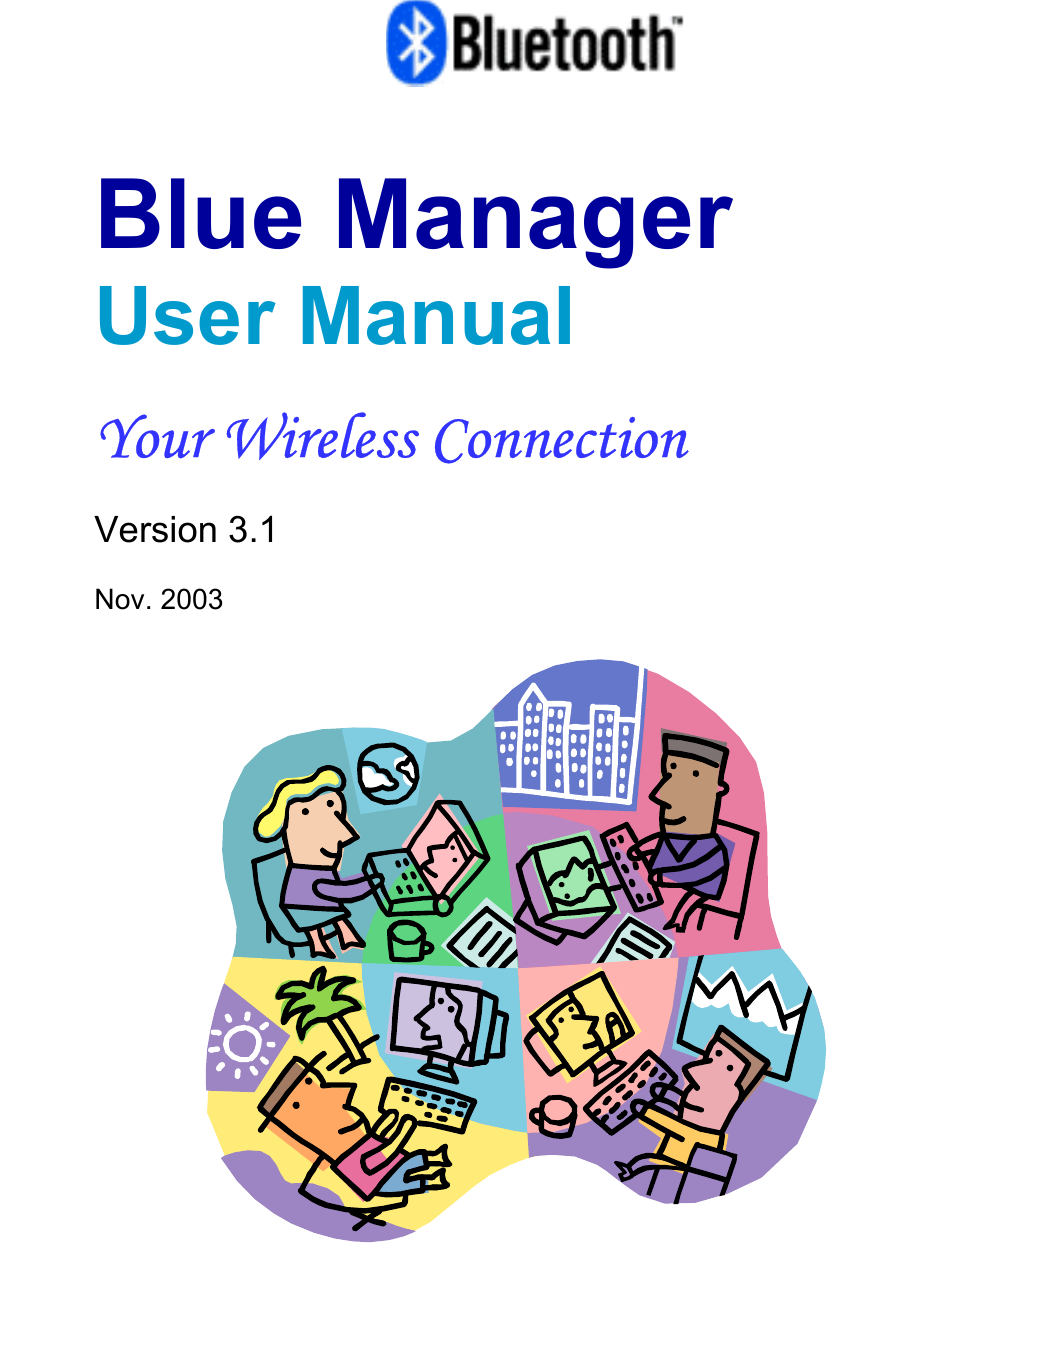       Blue Manager User Manual   Your Wireless Connection  Version 3.1  Nov. 2003           